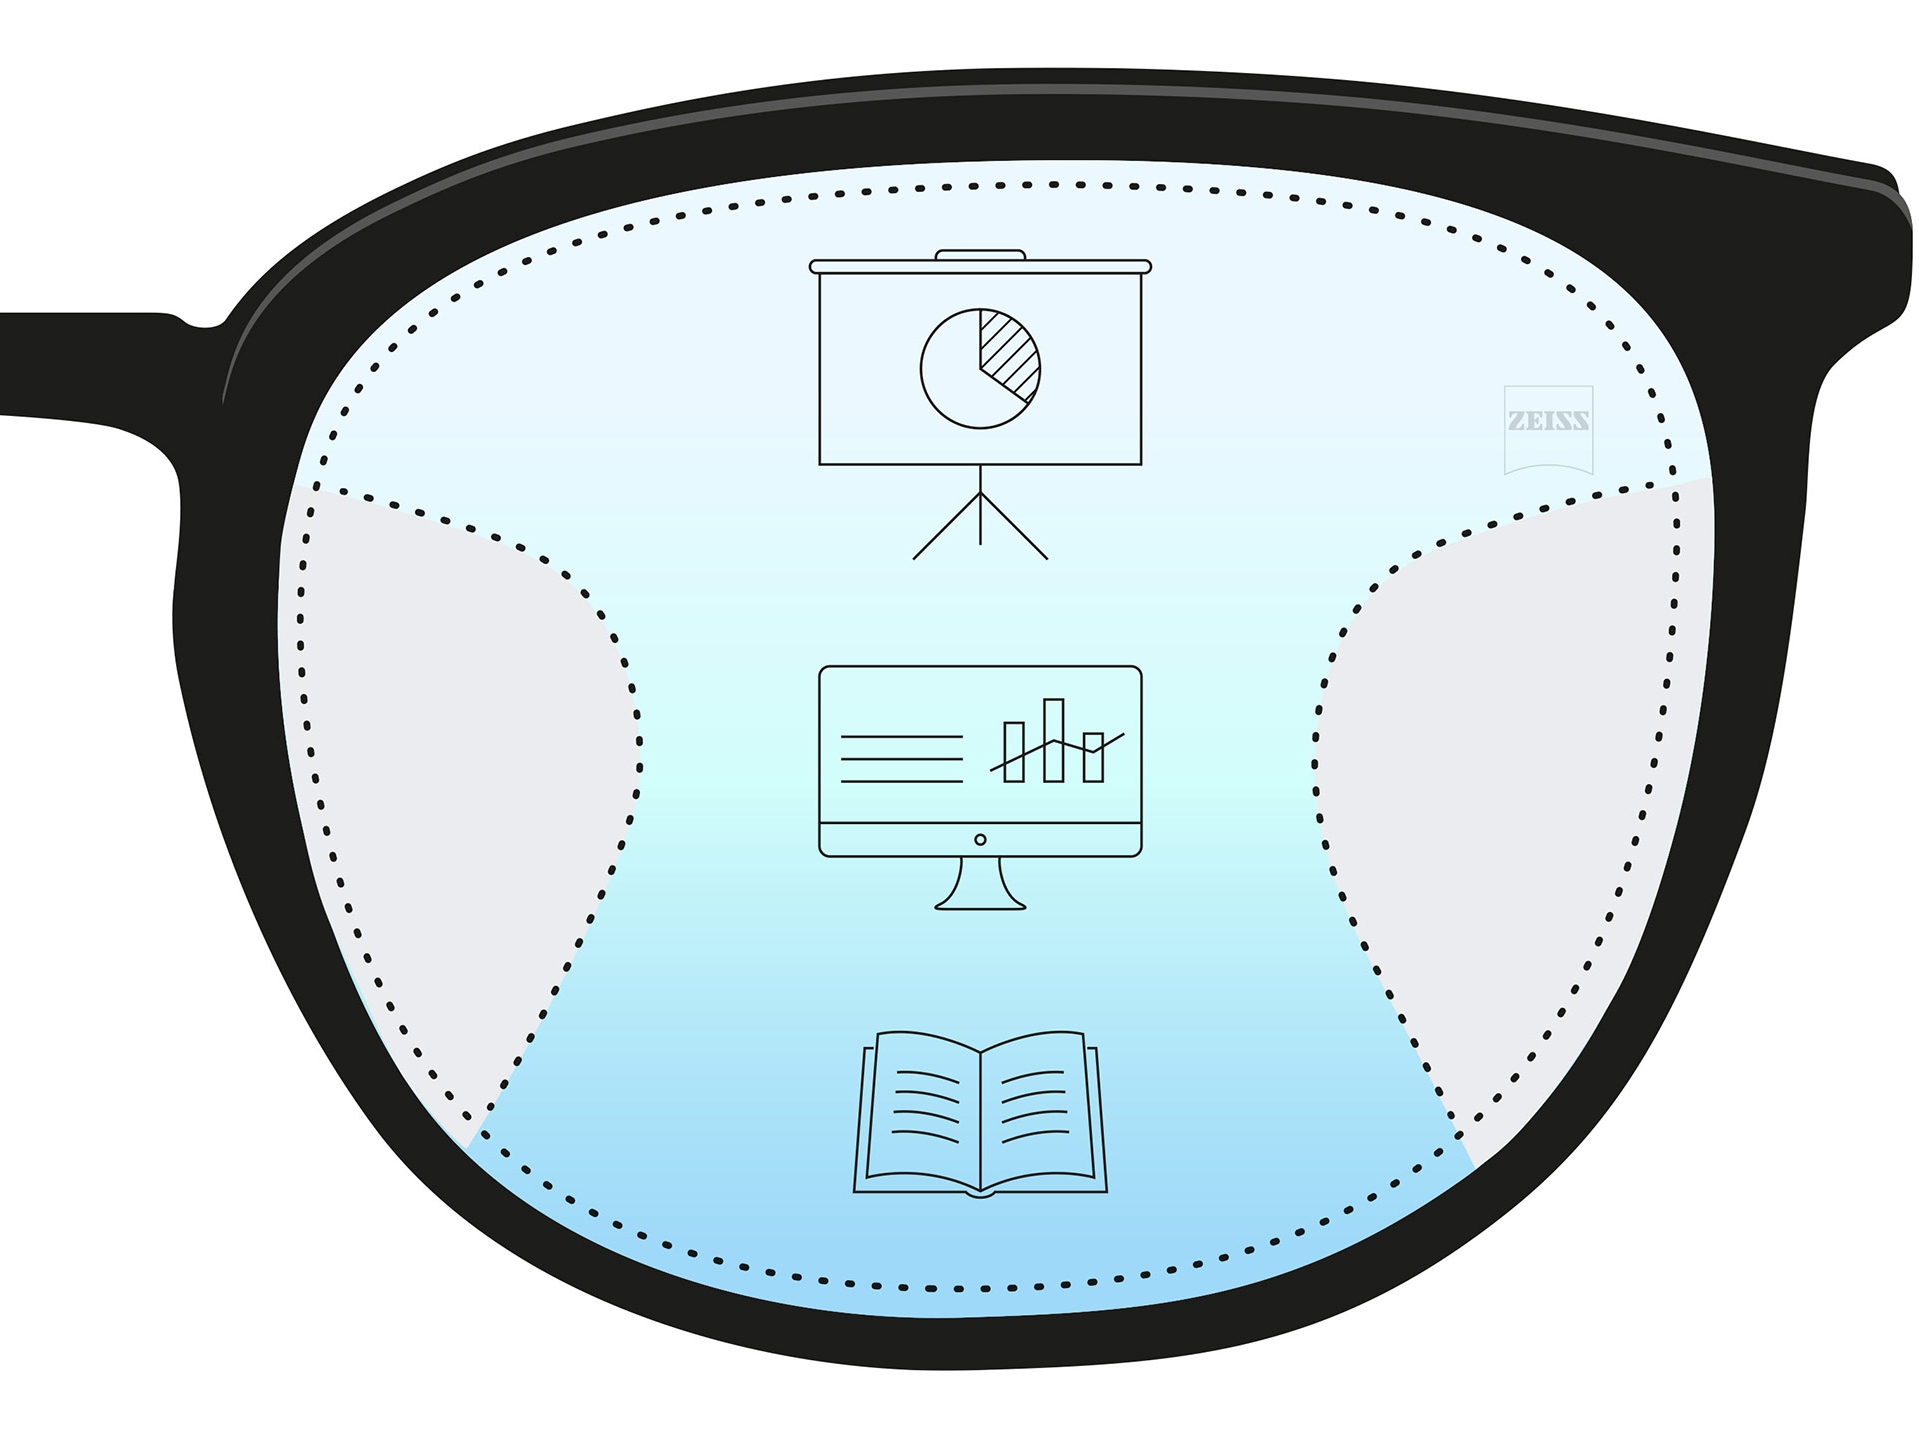 An illustration of a ZEISS Office lens. It shows the different distances of near, intermiediate and distance work. It is an example of a lens design for a specialized purpose.